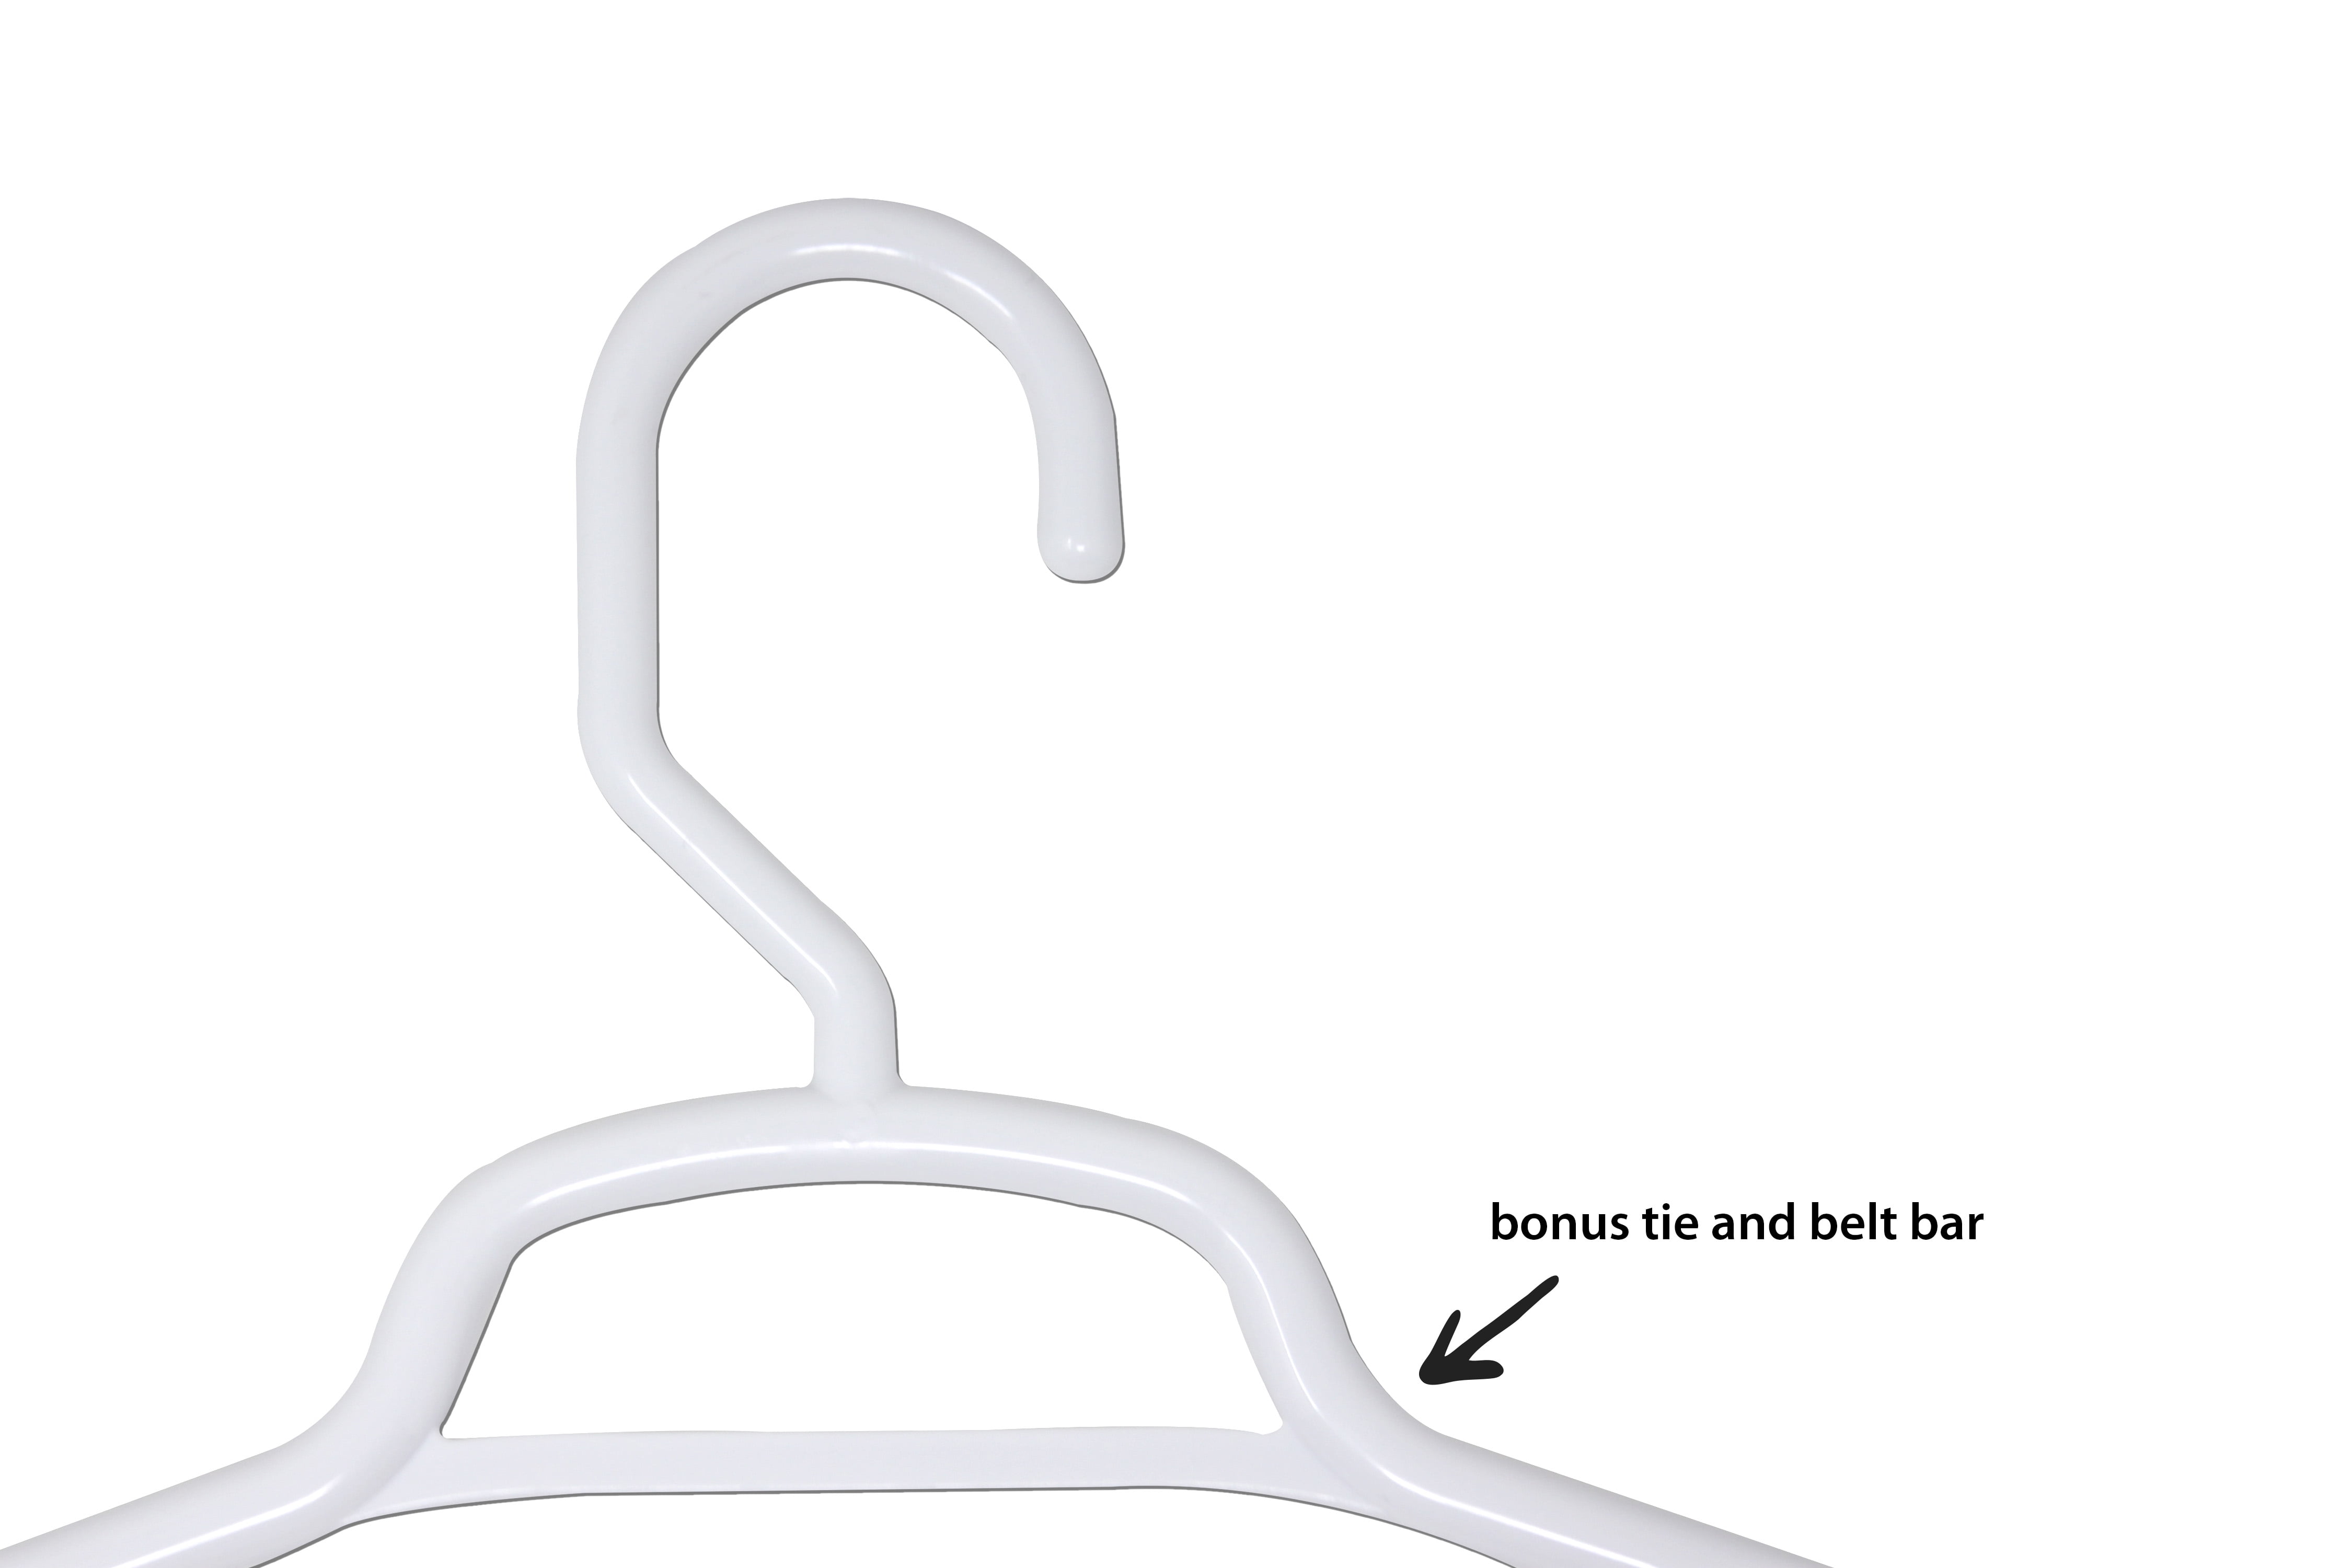 Wholesale Standard Plastic Hangers White(50 Pack) Manufacturer and Supplier